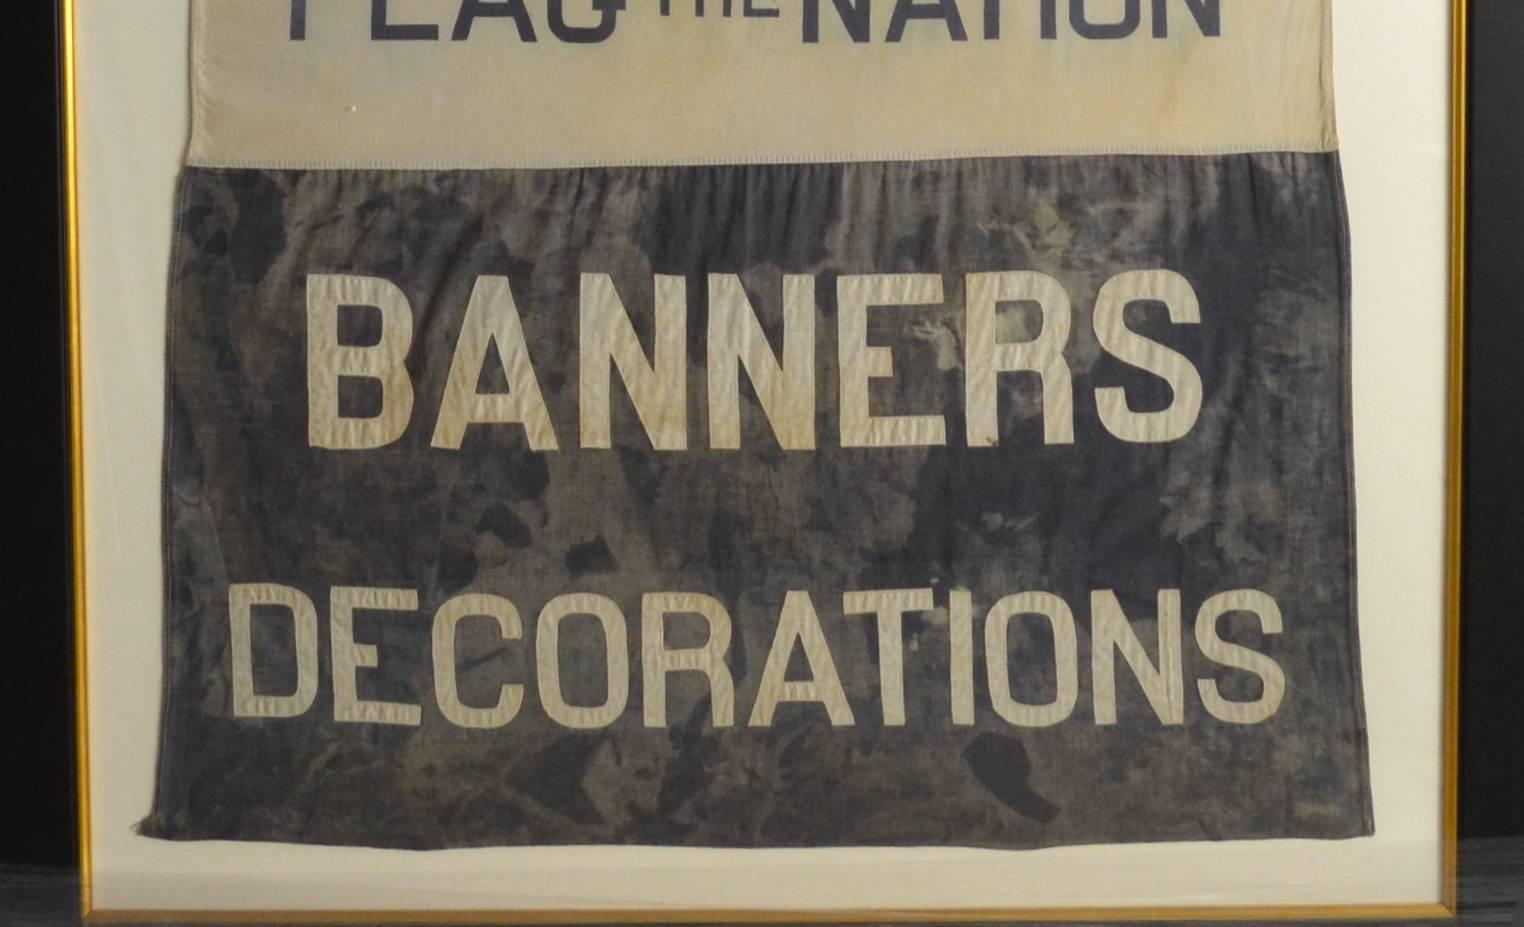 American Rare Giant Flag Company Advertising Banner, Vintage For Sale